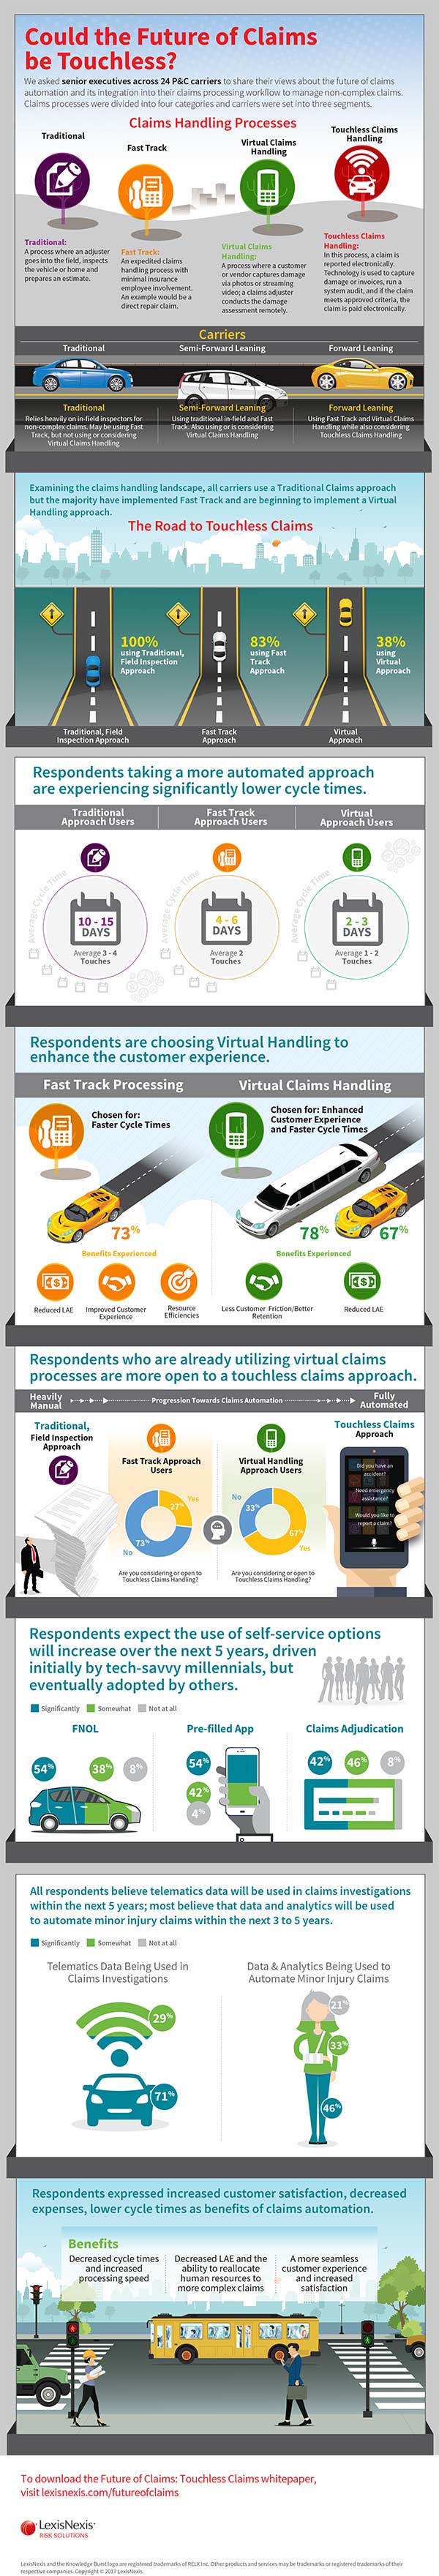 Touchless_Claims_Infographic